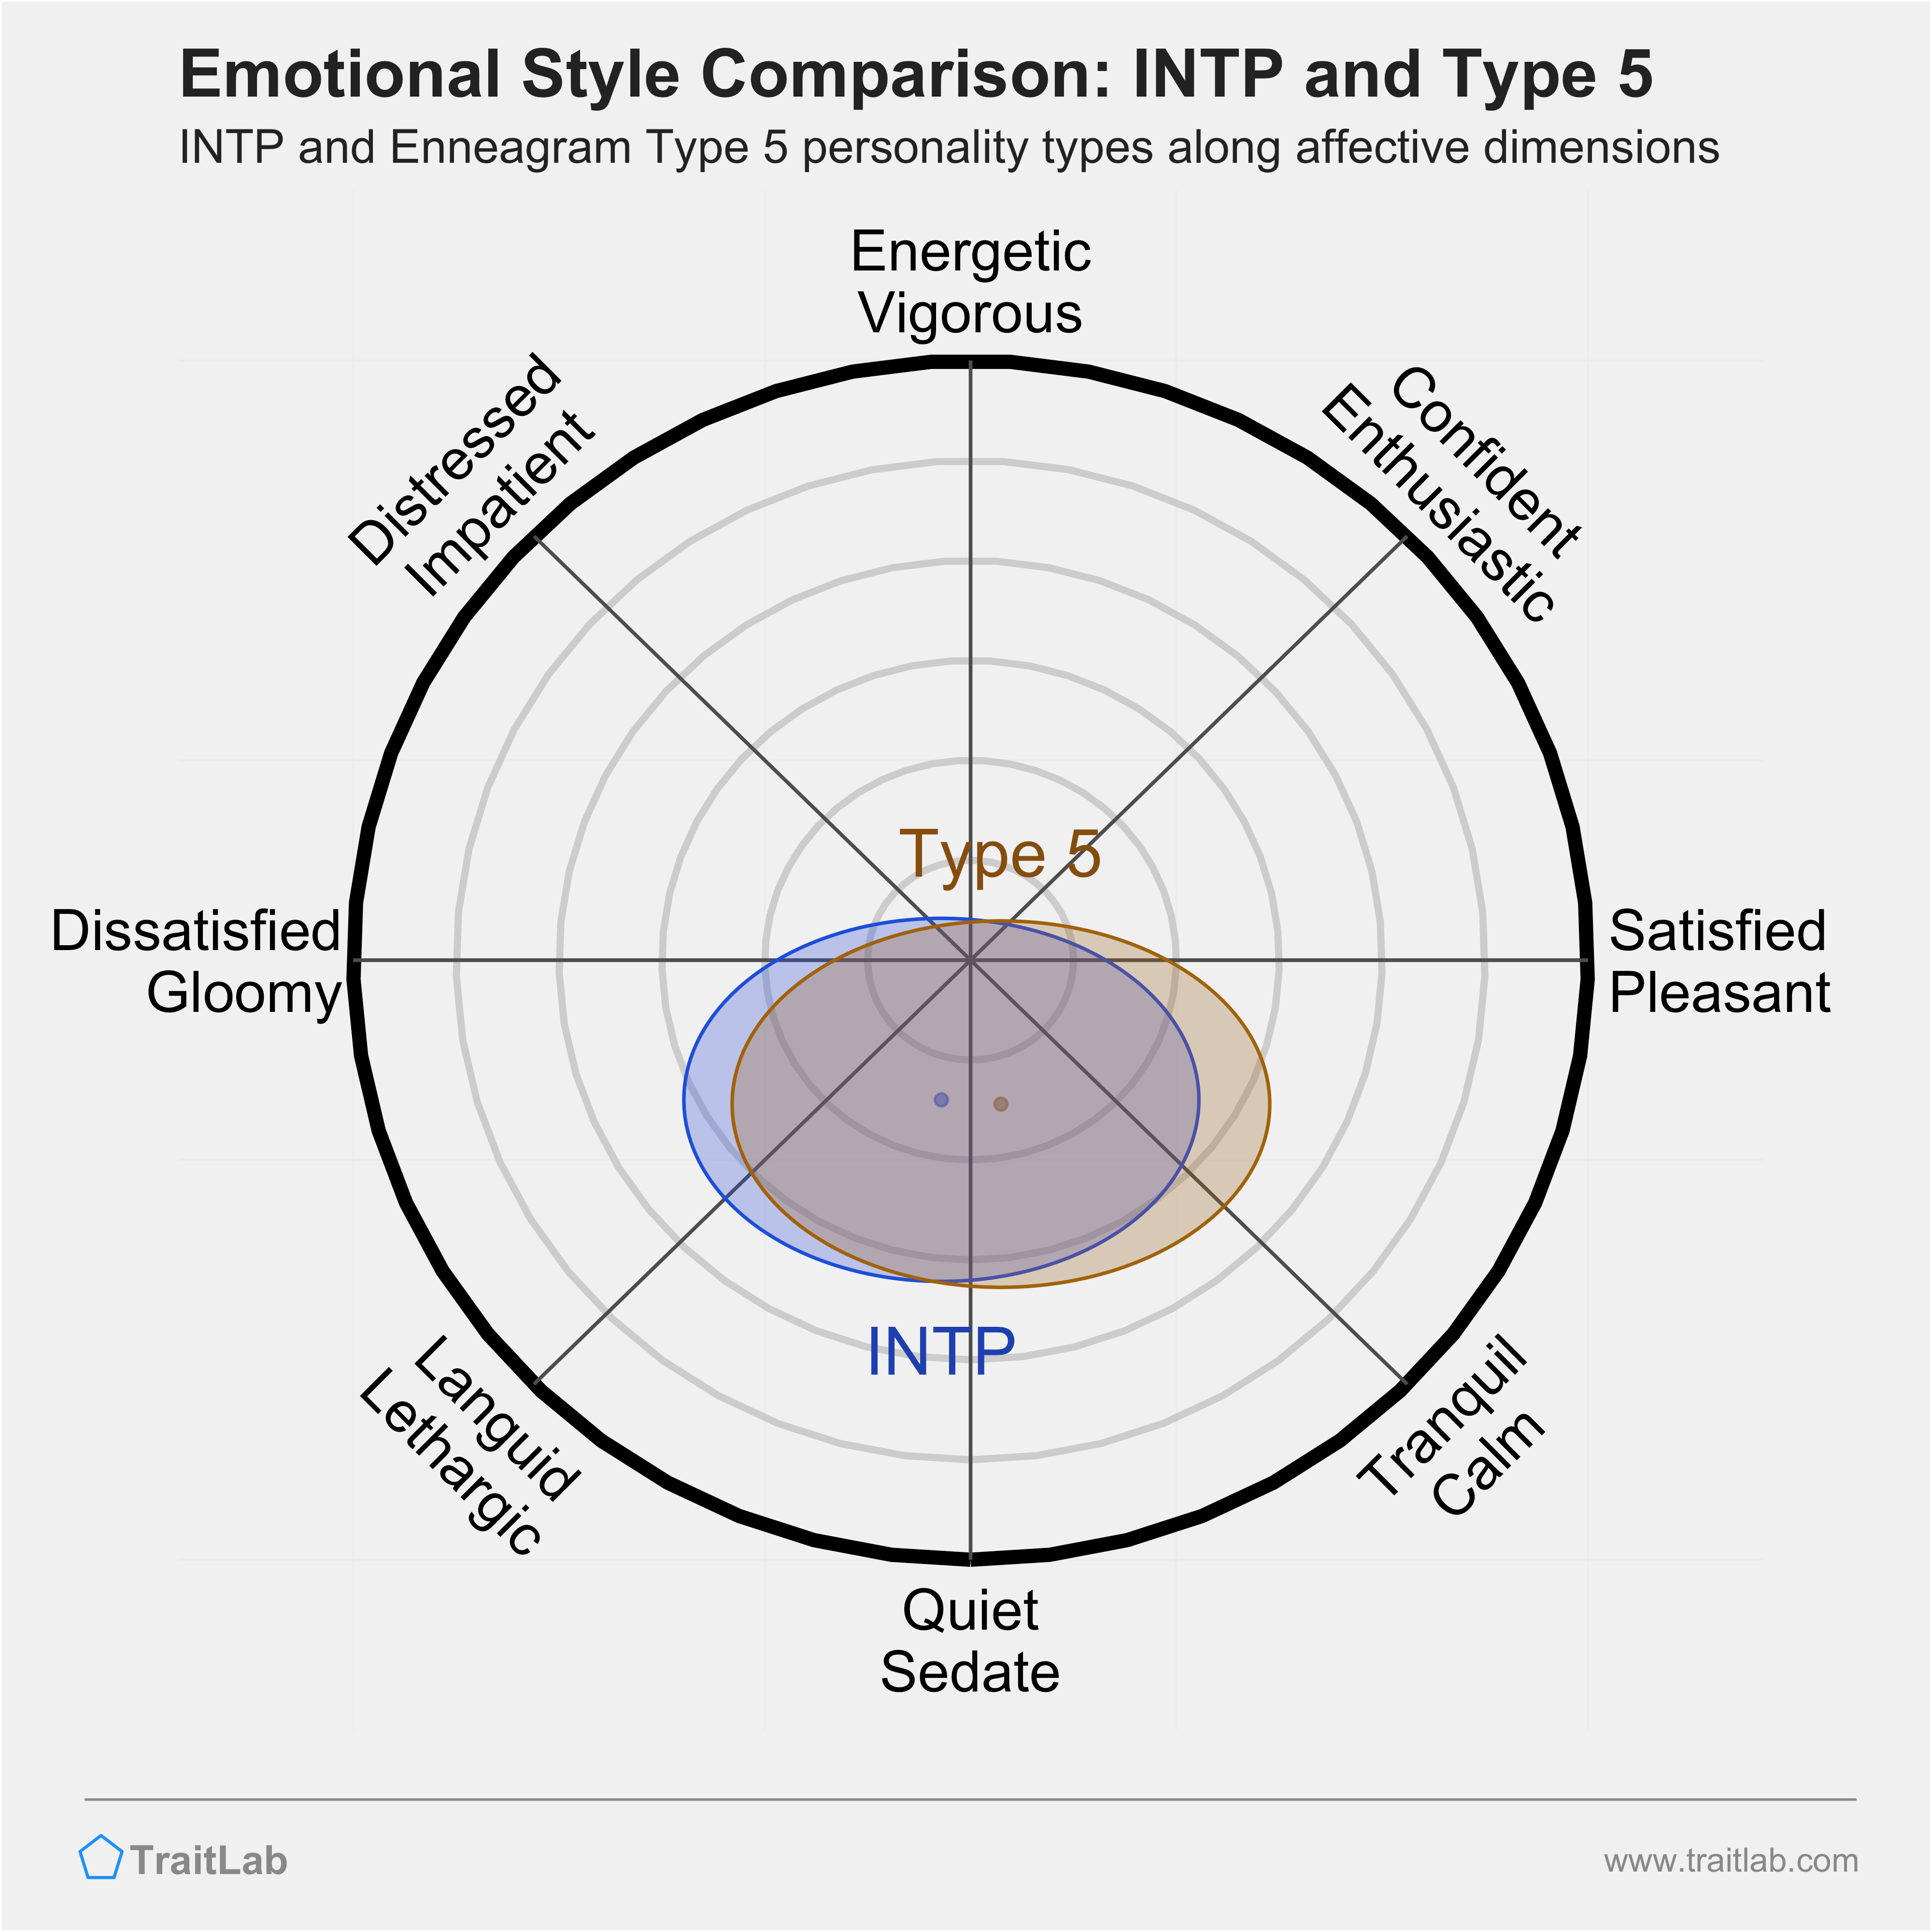 INTP and Type 5 comparison across emotional (affective) dimensions